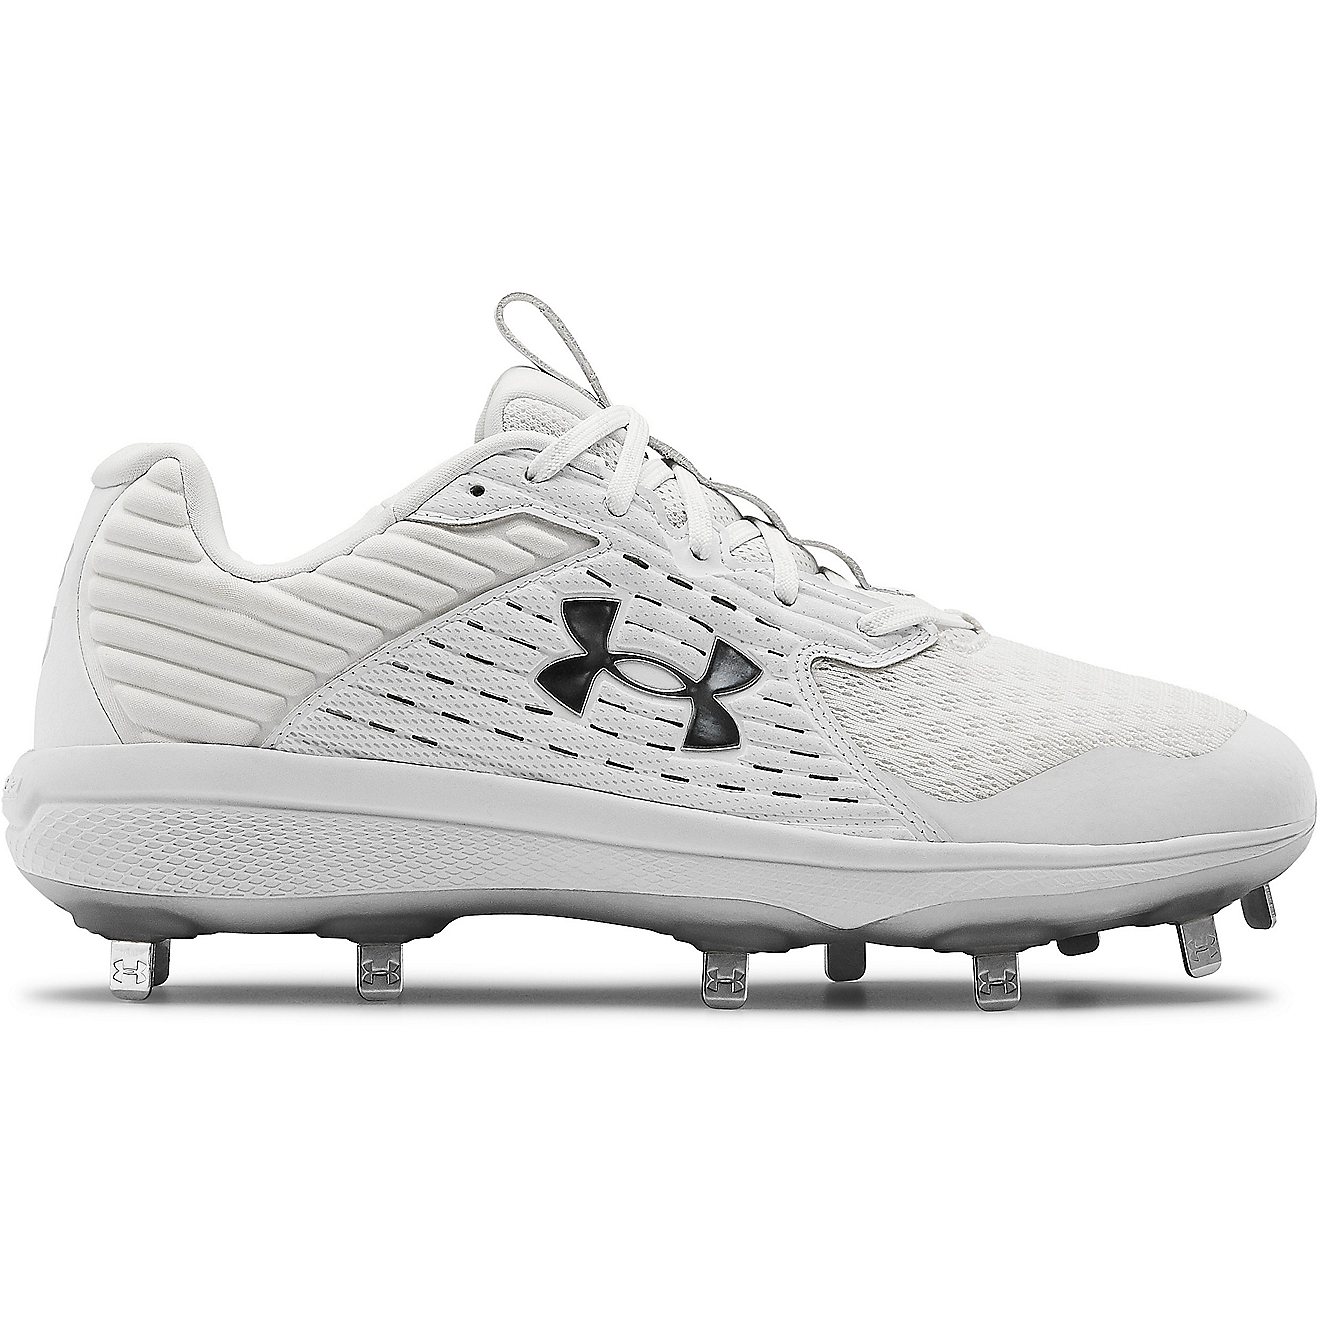 Under Armour Men's Yard Low MT Baseball Cleats                                                                                   - view number 1